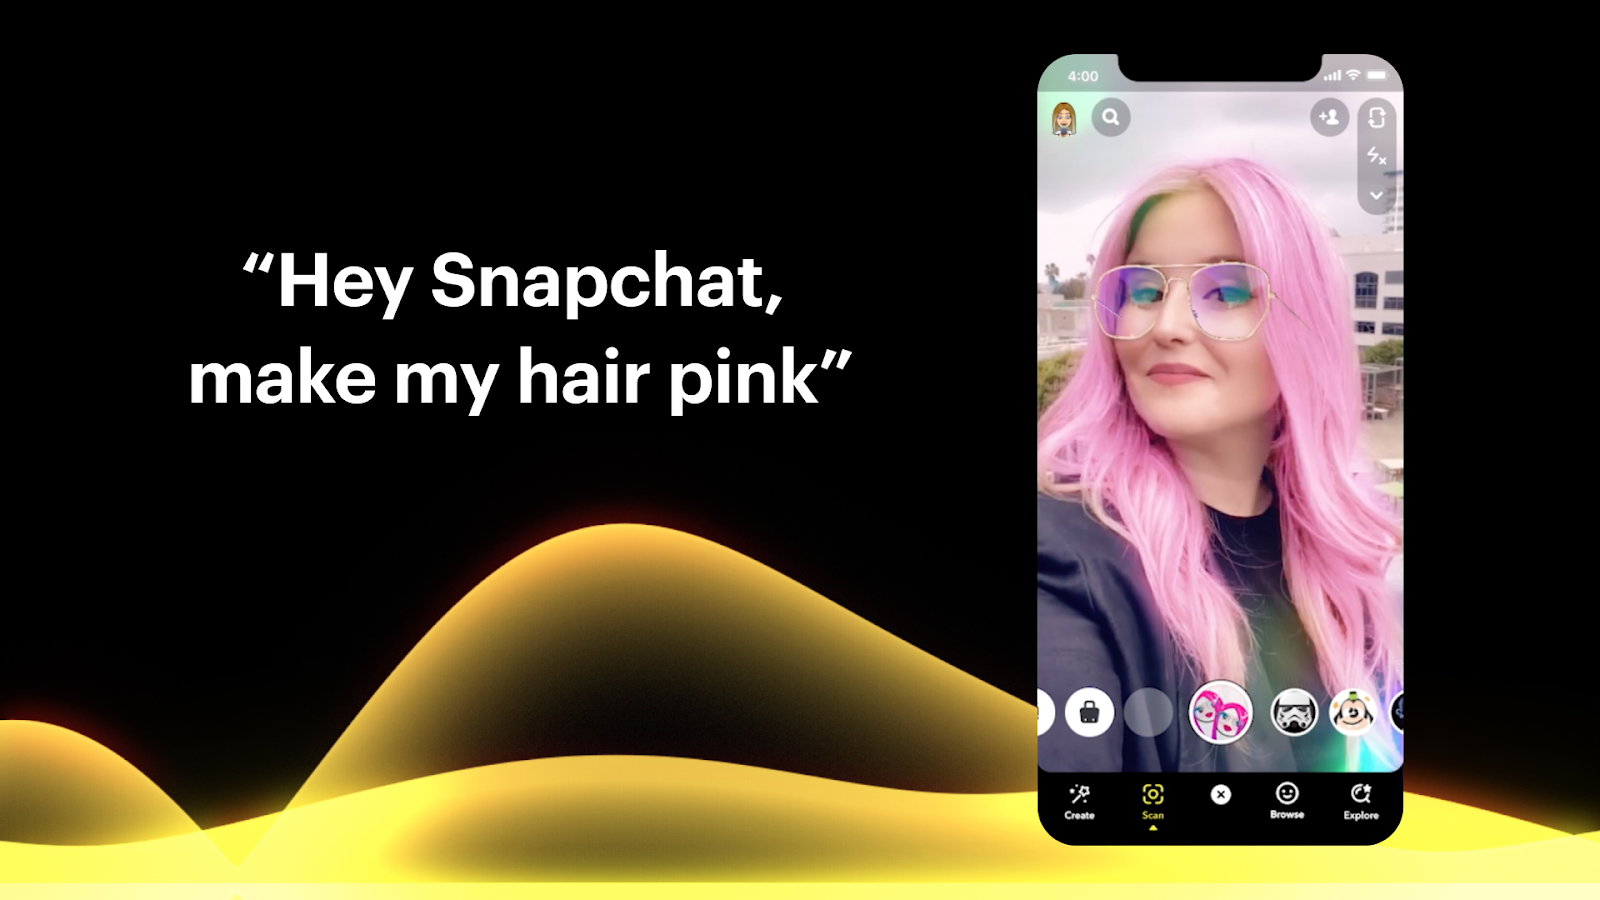 Snapchat’s combo of AI and AR is already going places